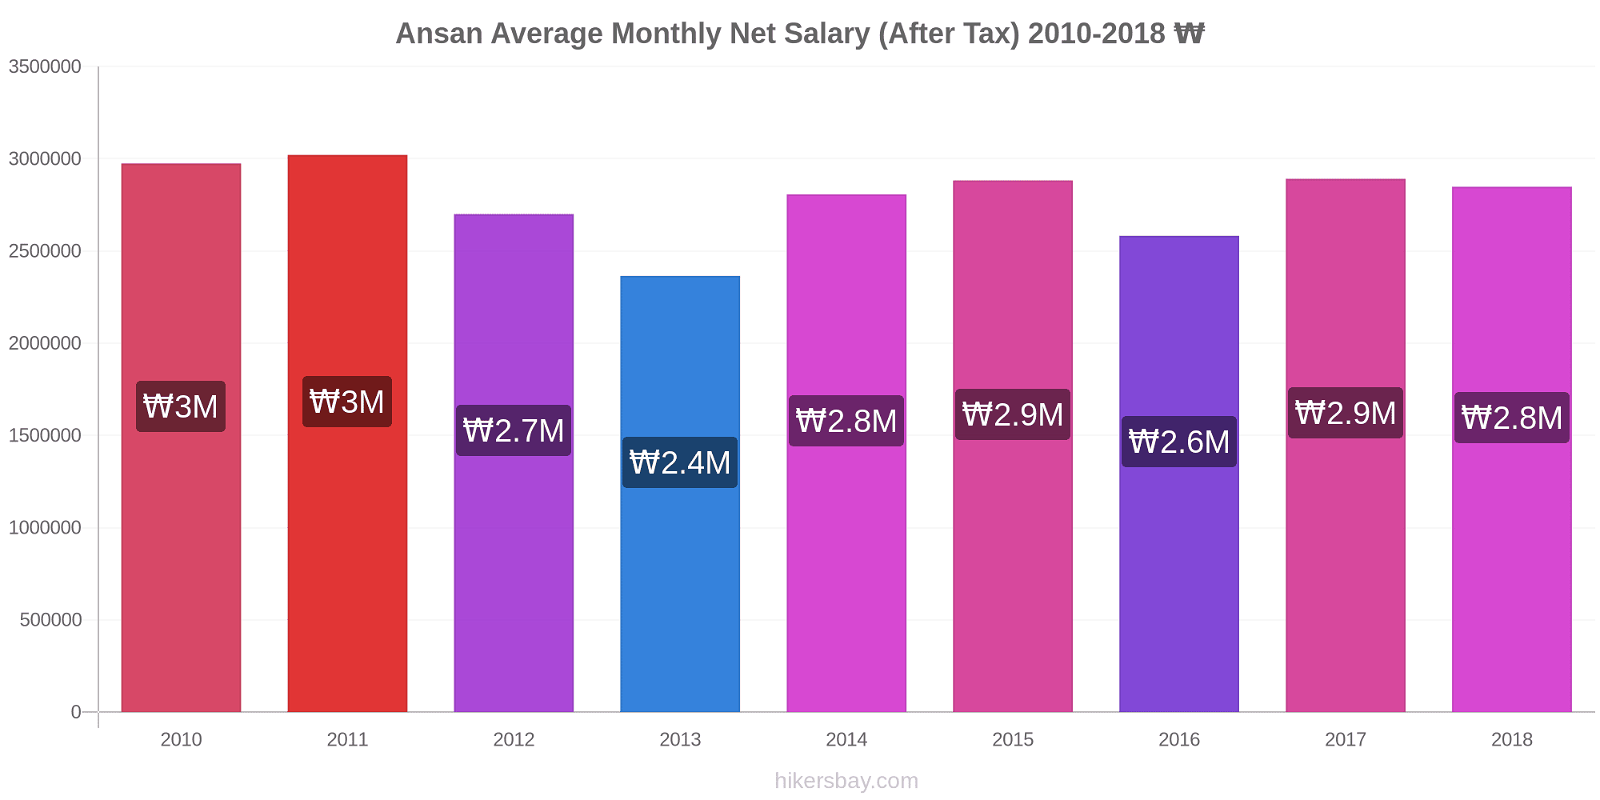 Ansan price changes Average Monthly Net Salary (After Tax) hikersbay.com